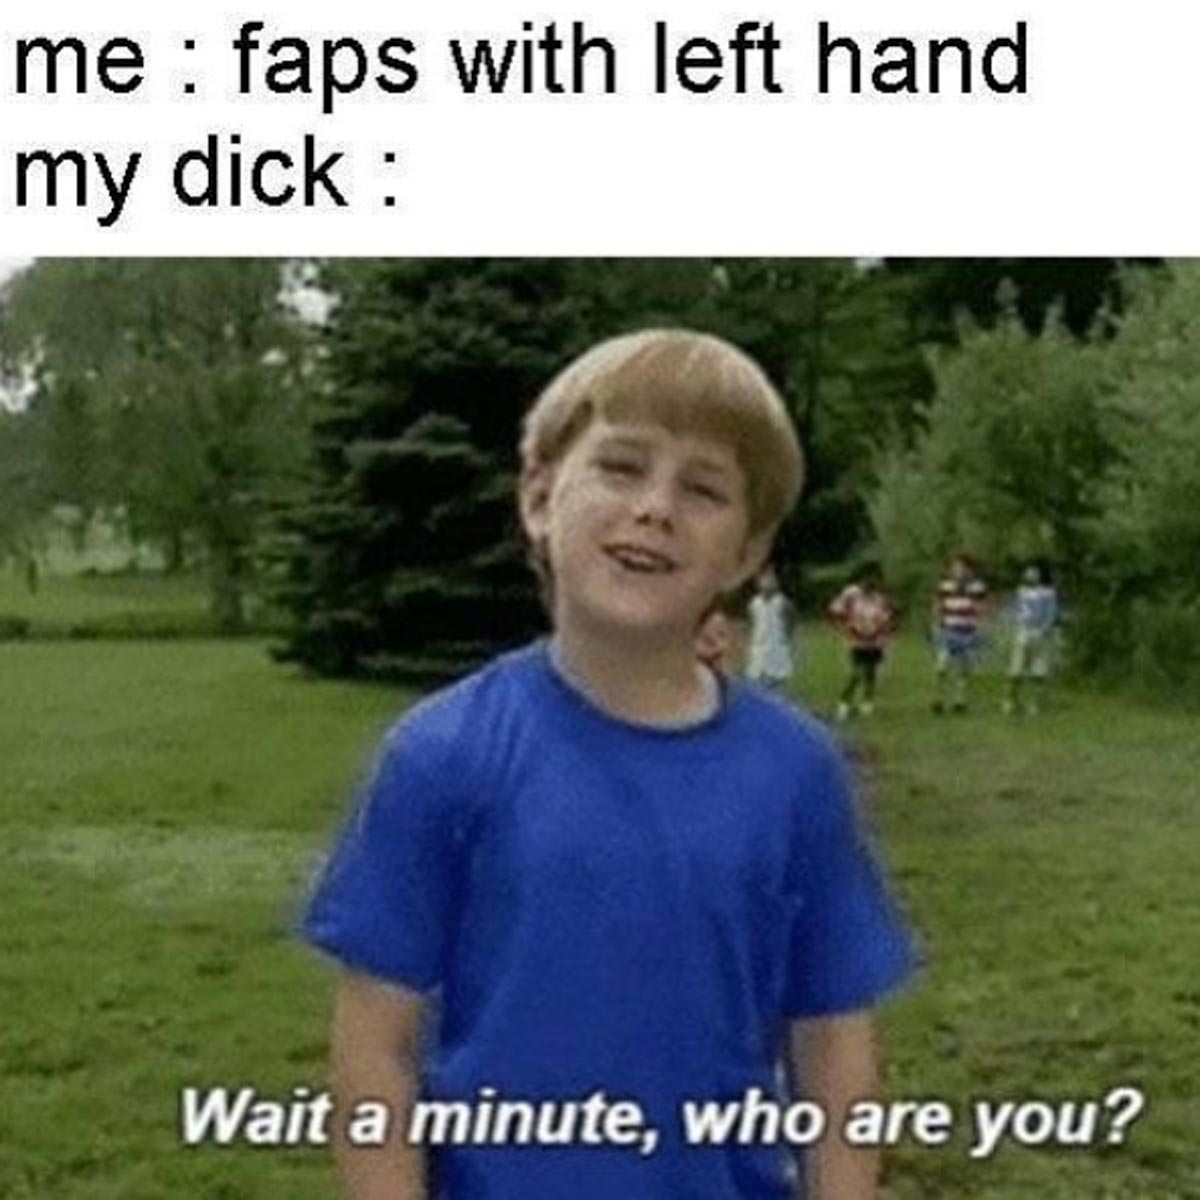 funny sex memes - wait a minute meme - me faps with left hand my dick Wait a minute, who are you?